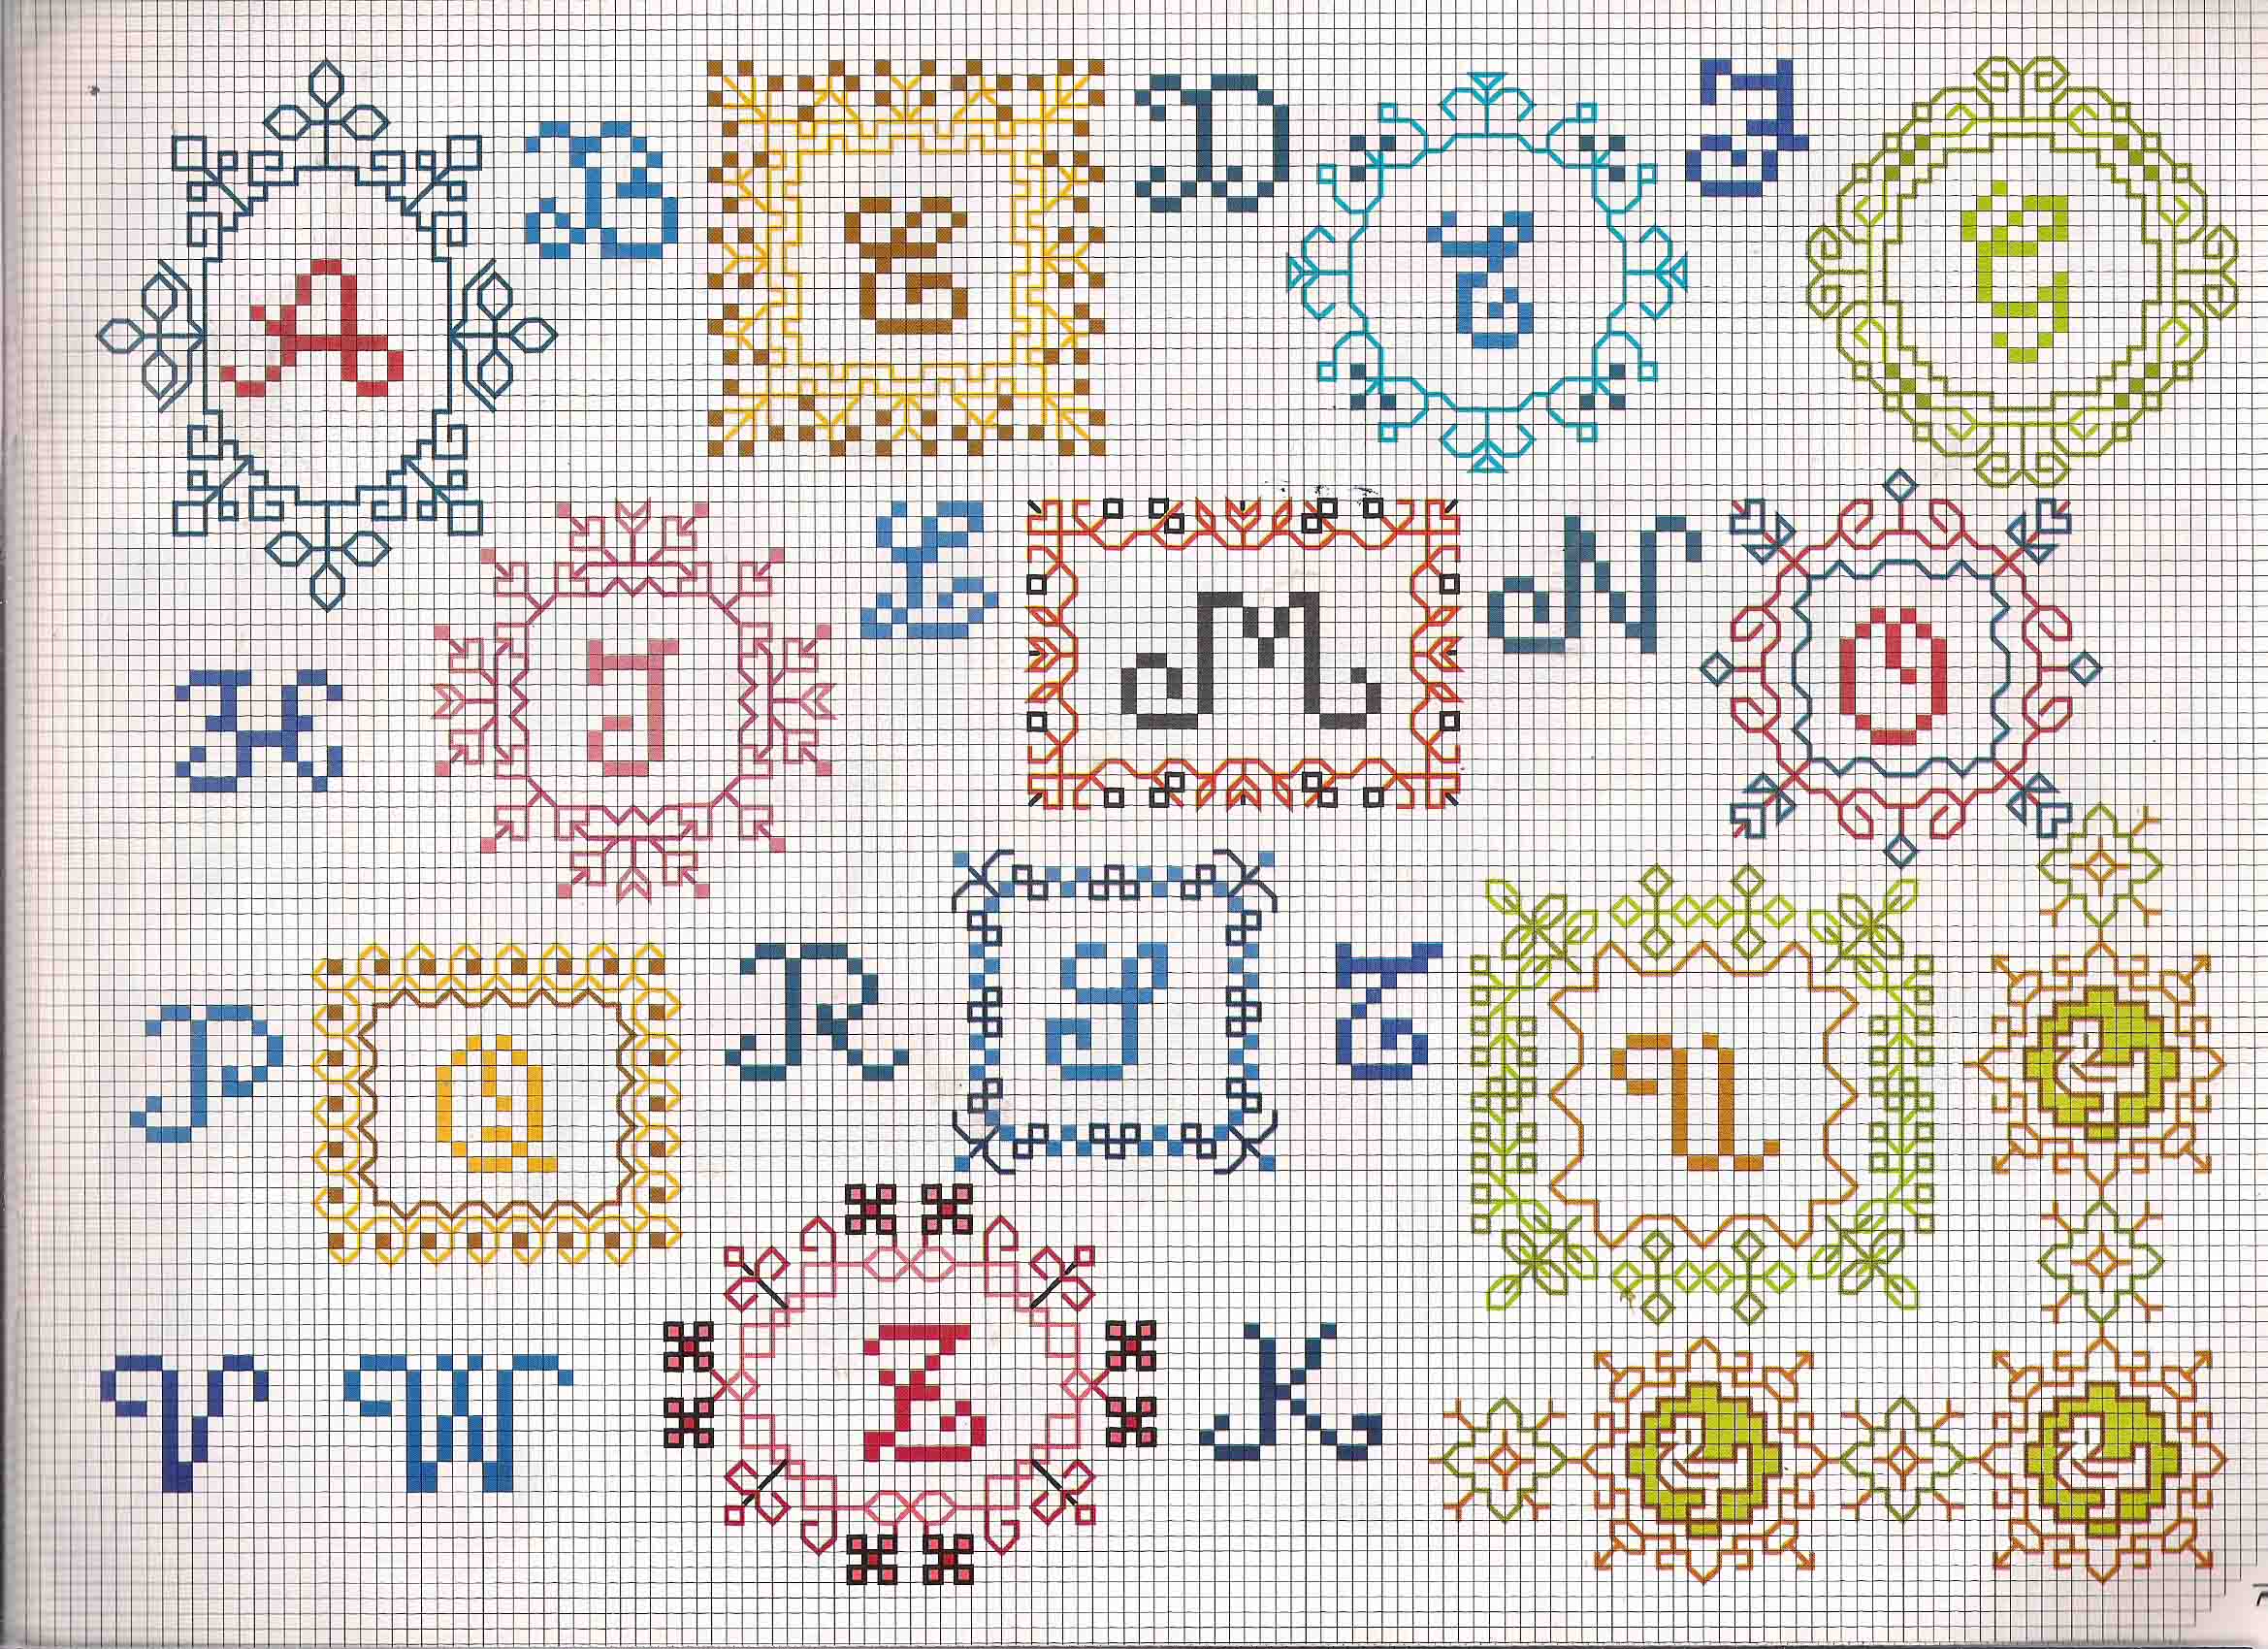 Cross stitch alphabet with letters in colored tiles